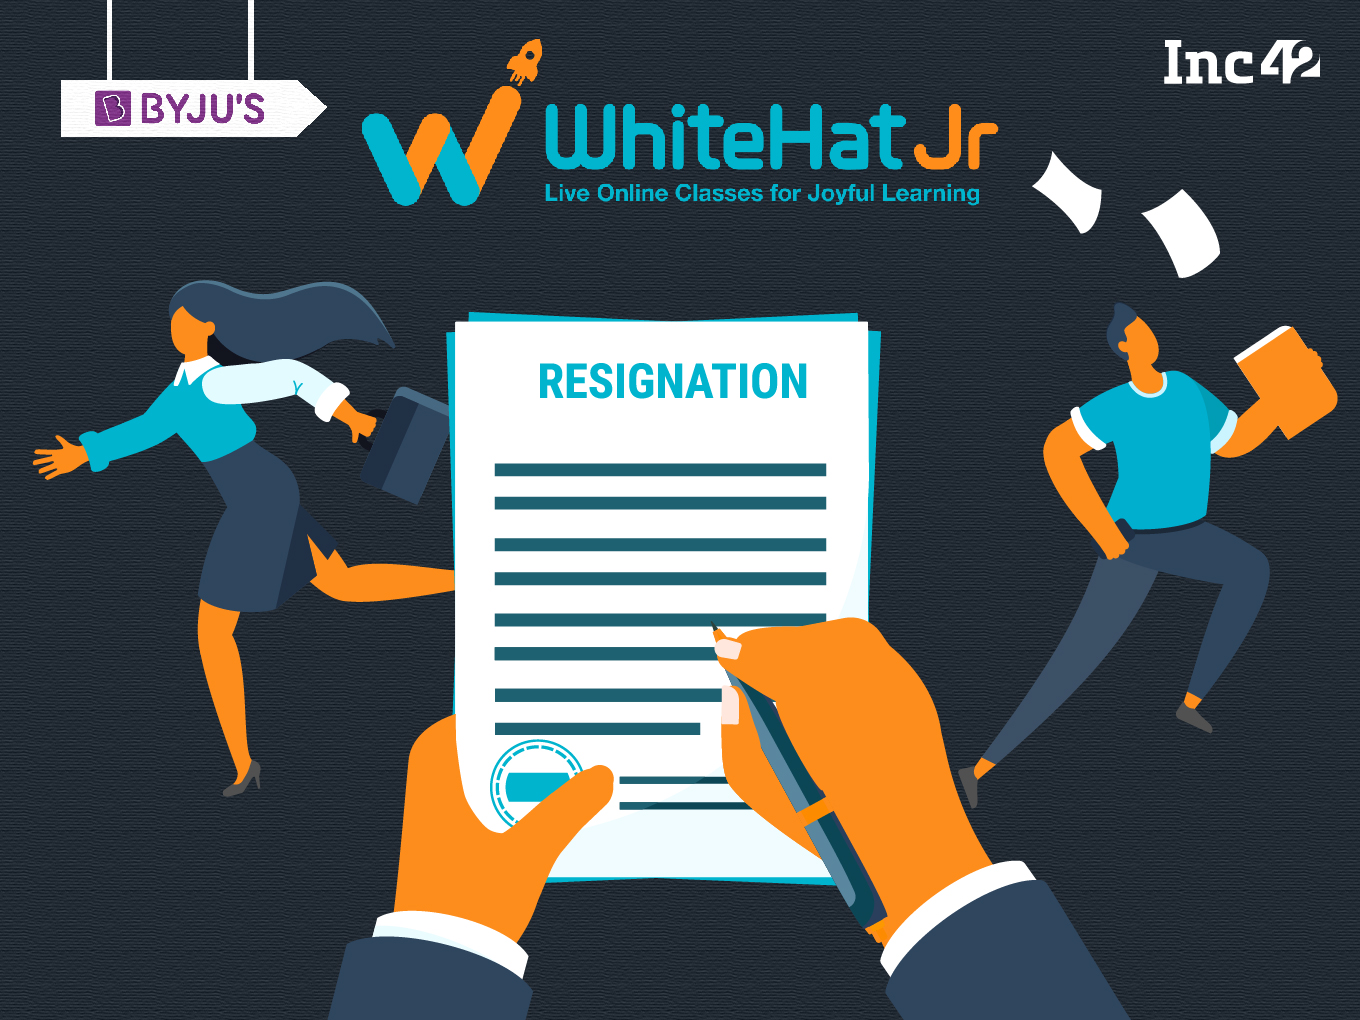 Over 800 WhiteHatJr Employees Resign As Edtech Giant Asks To Report To Office